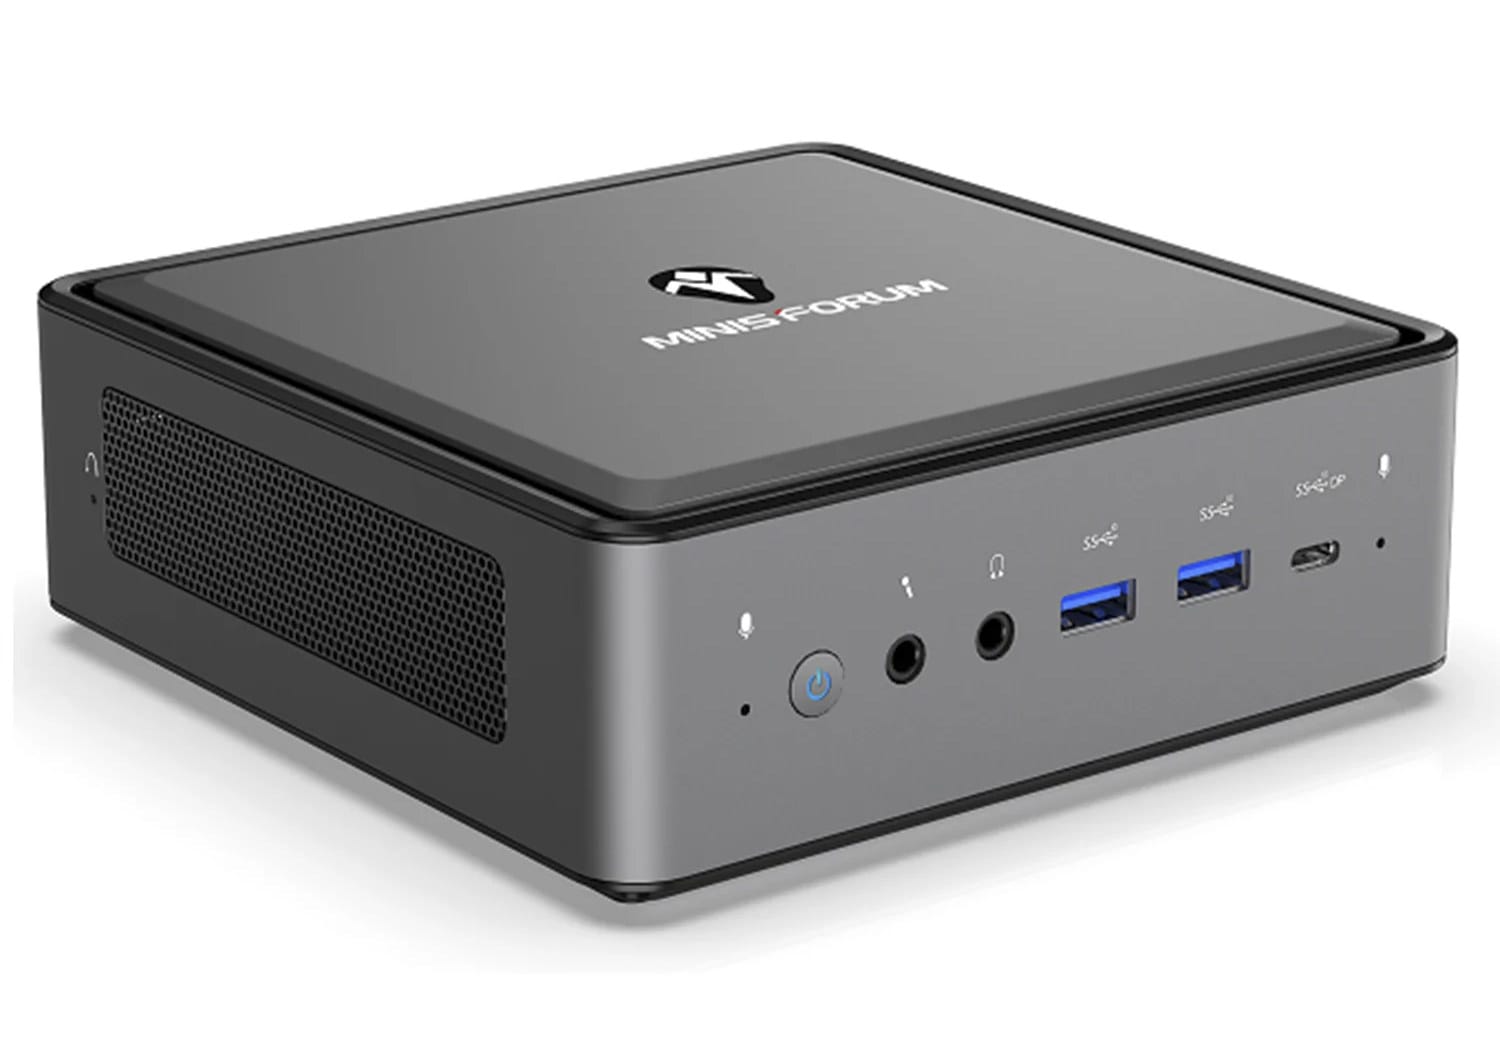 Intel Core i5-1135G7 Tiger Lake mini PC with 12GB RAM sells for